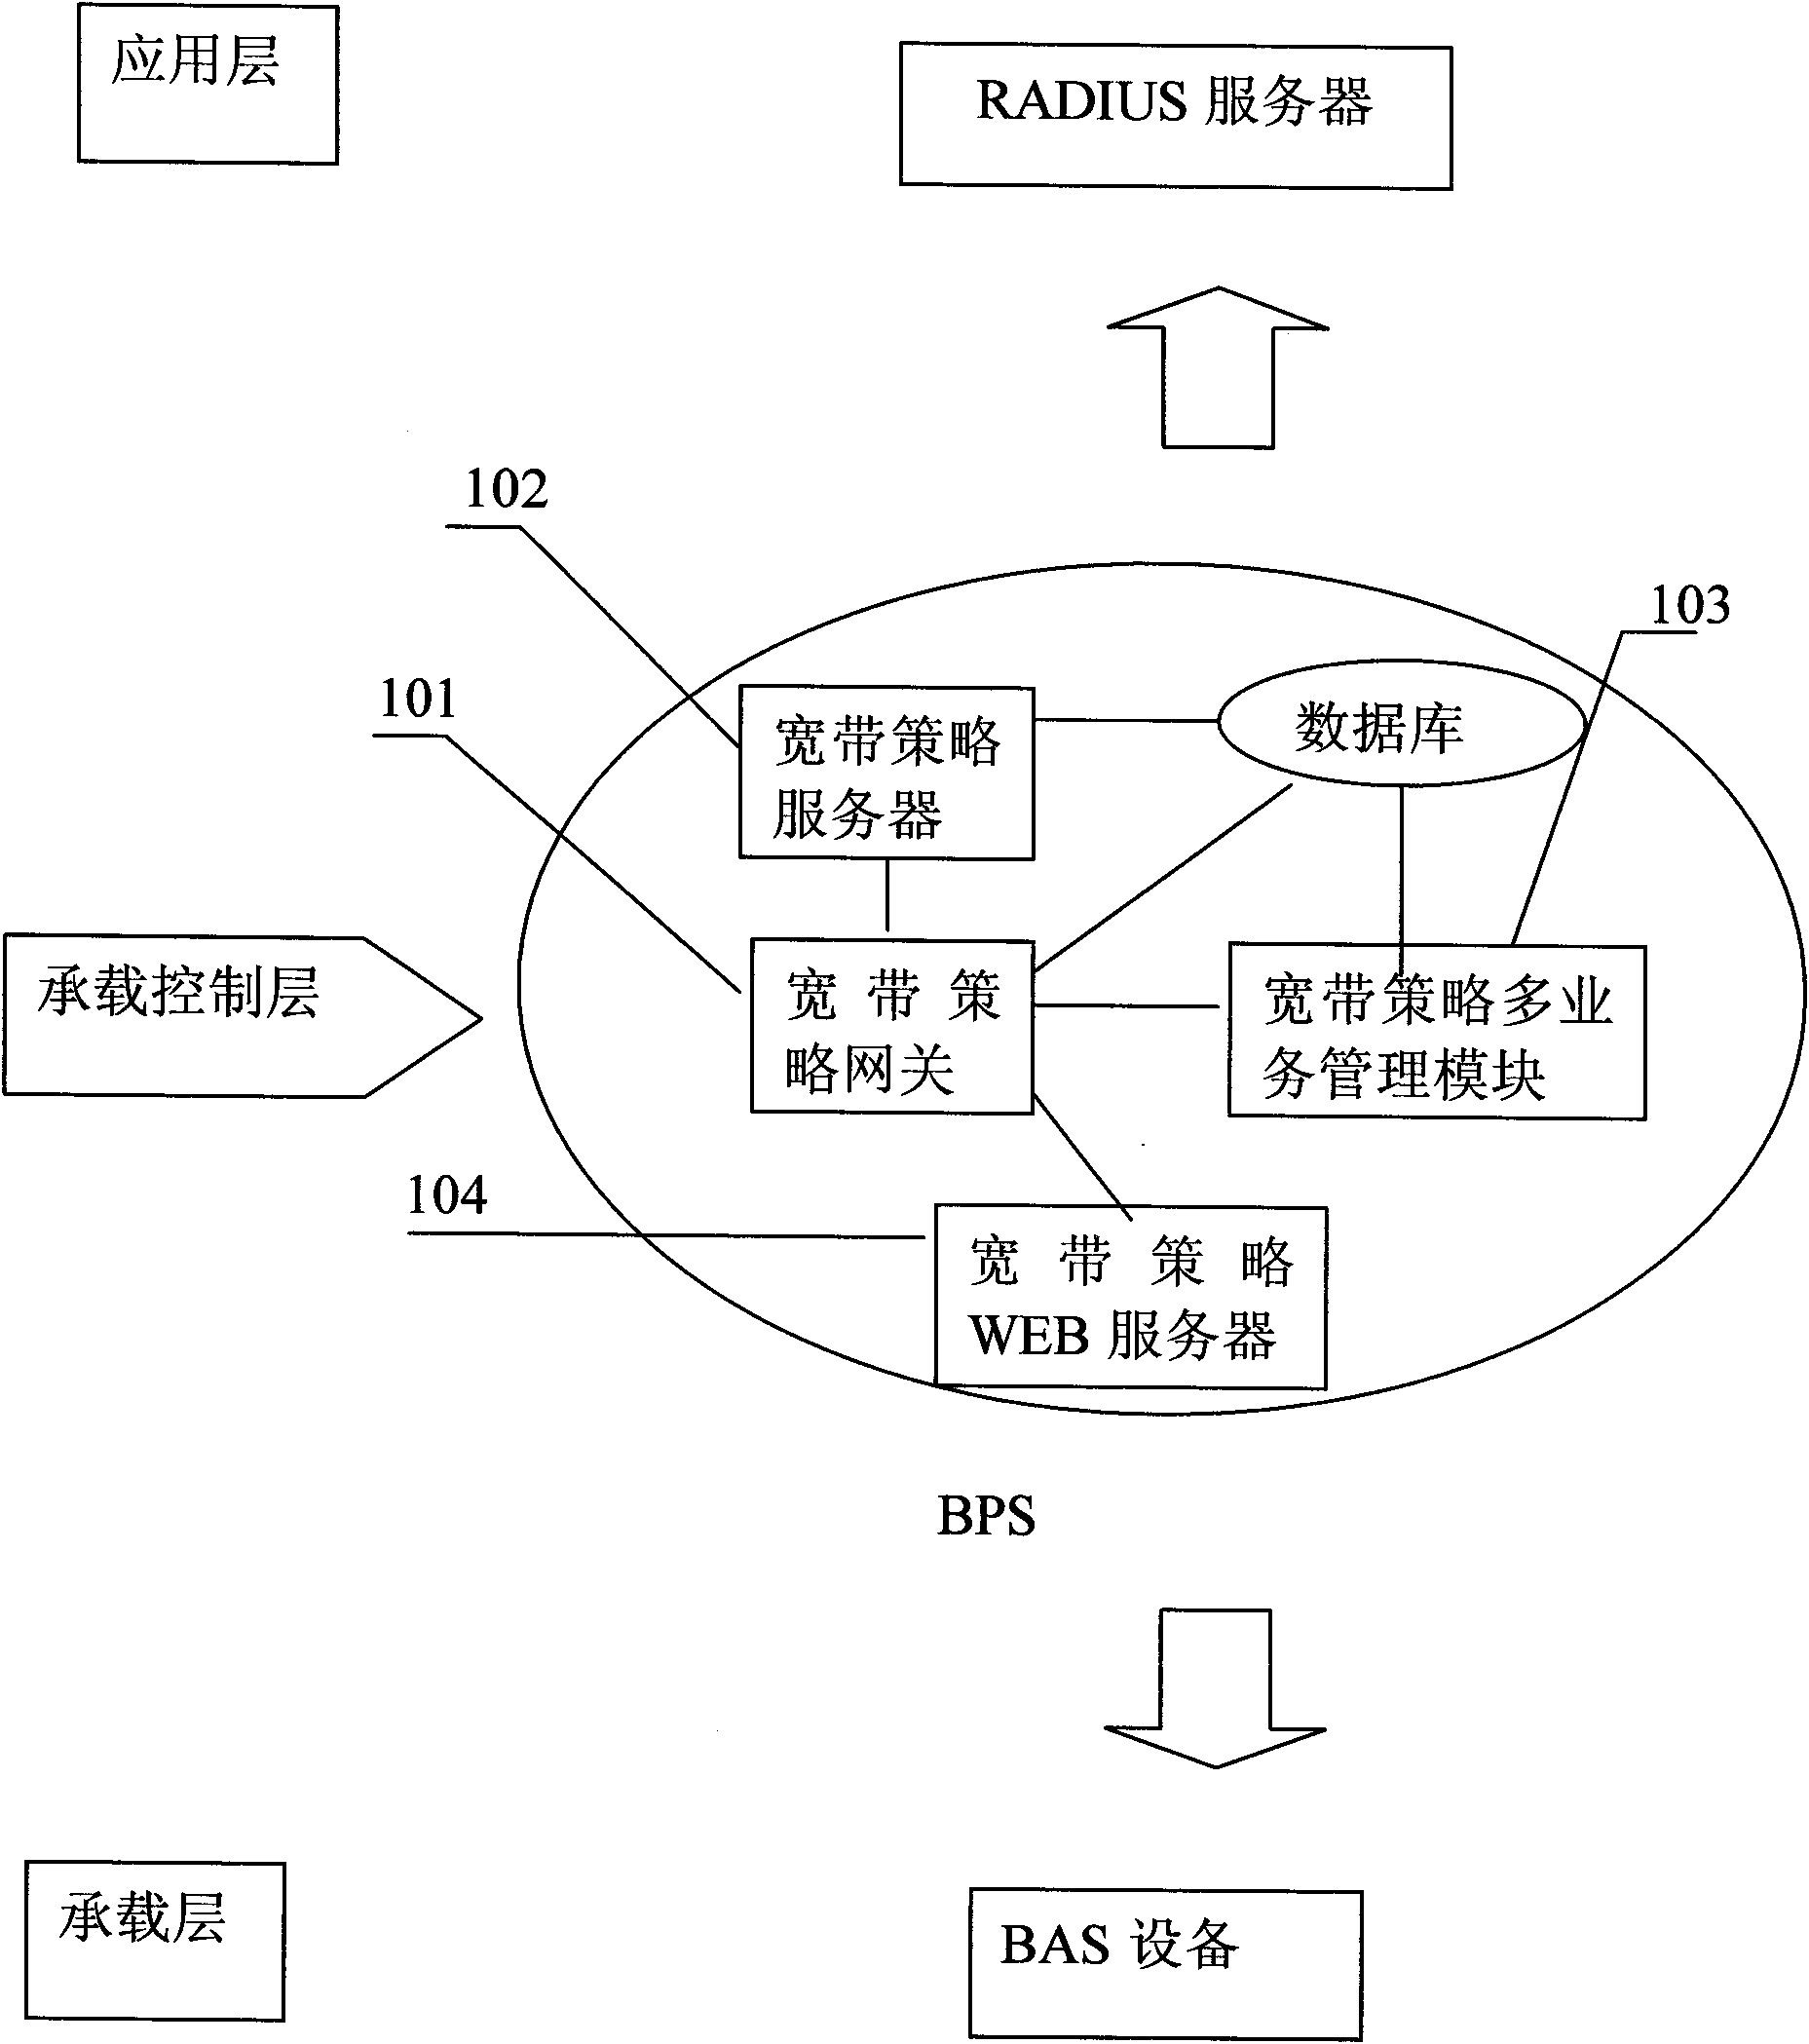 Method and system for dynamically adjusting bandwidth service and broadband policy system